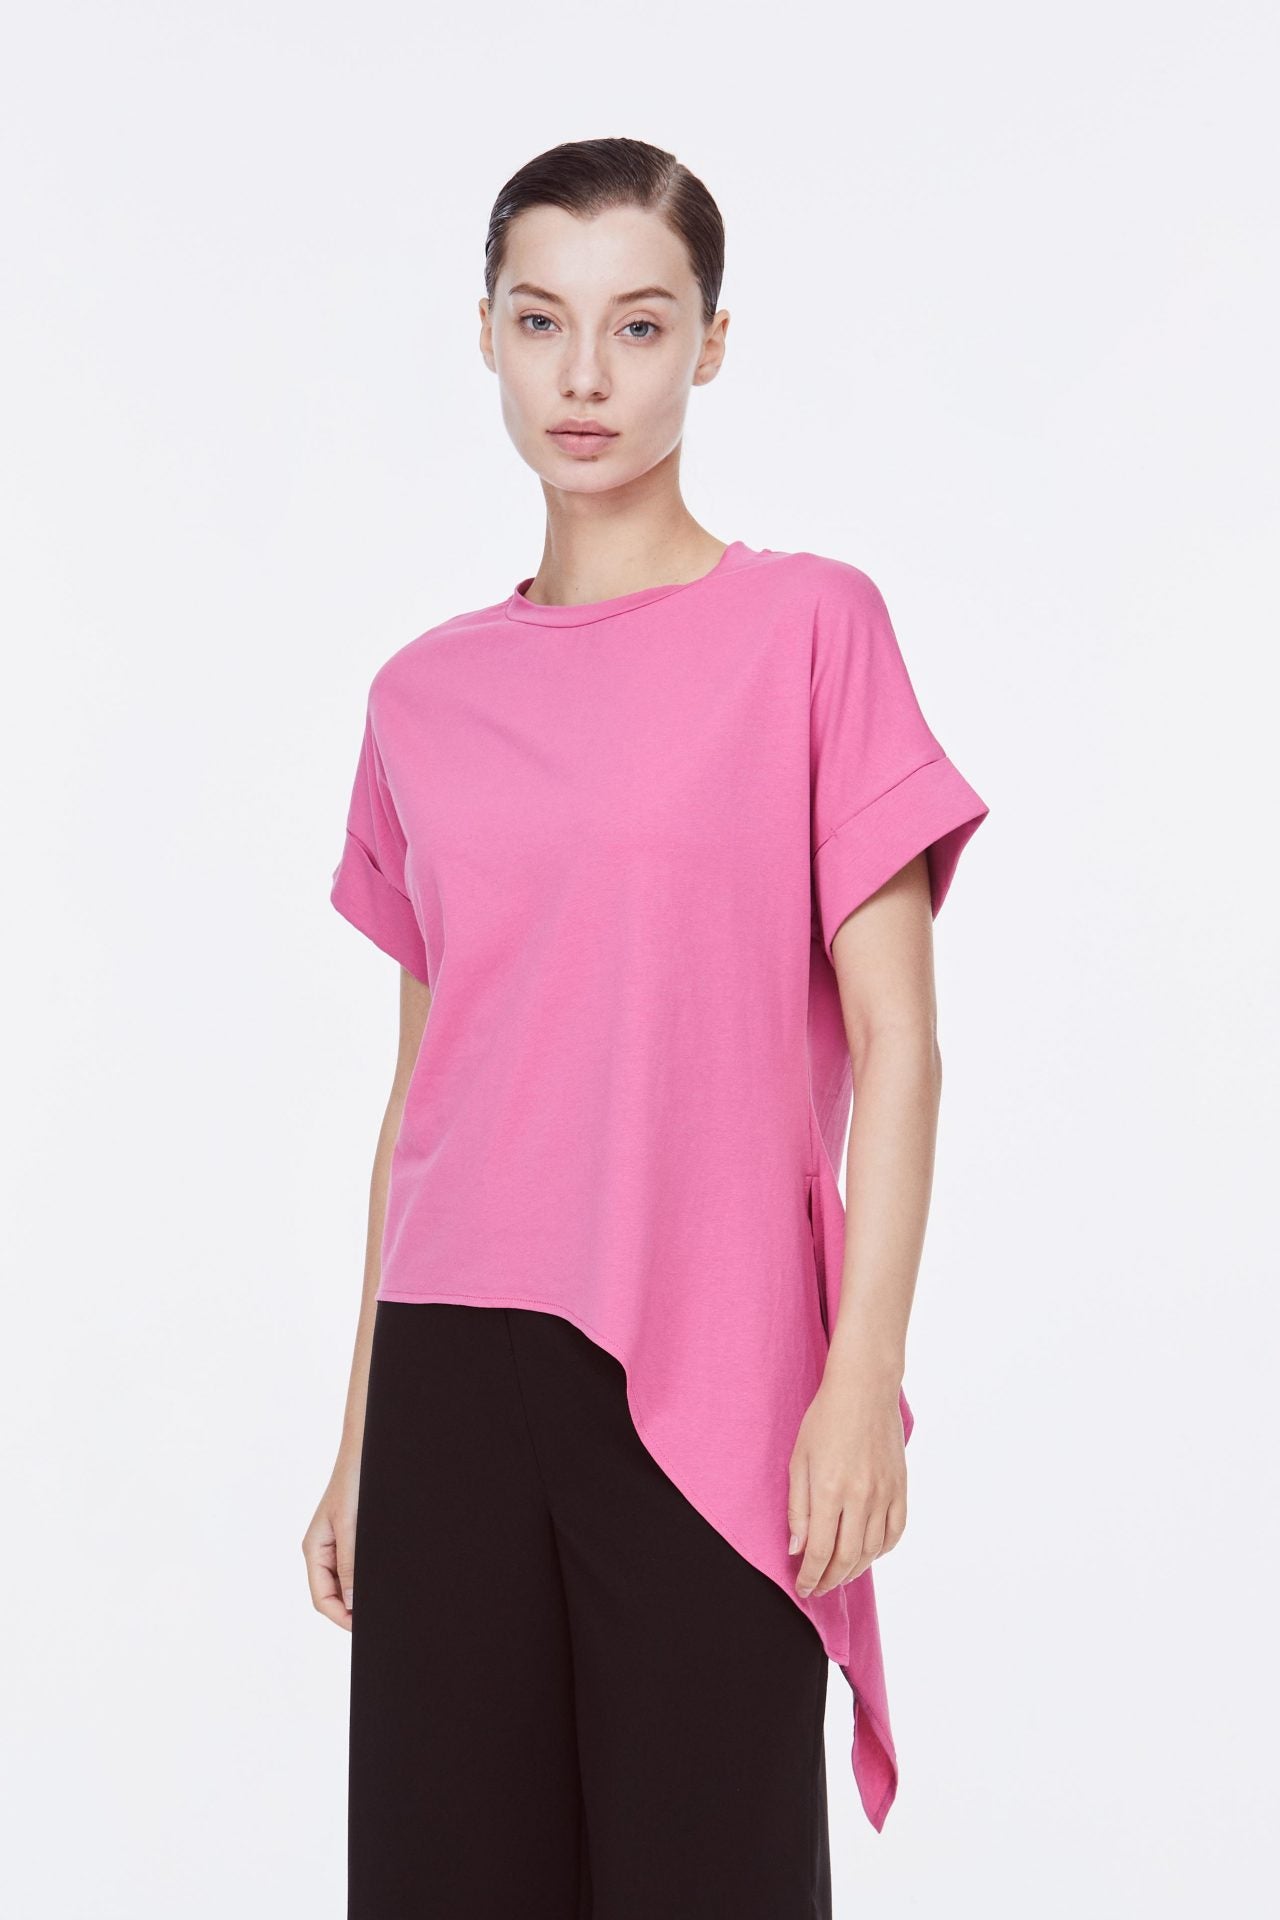 AT 10964 ROUND NECK TOP HOT PINK FRONT